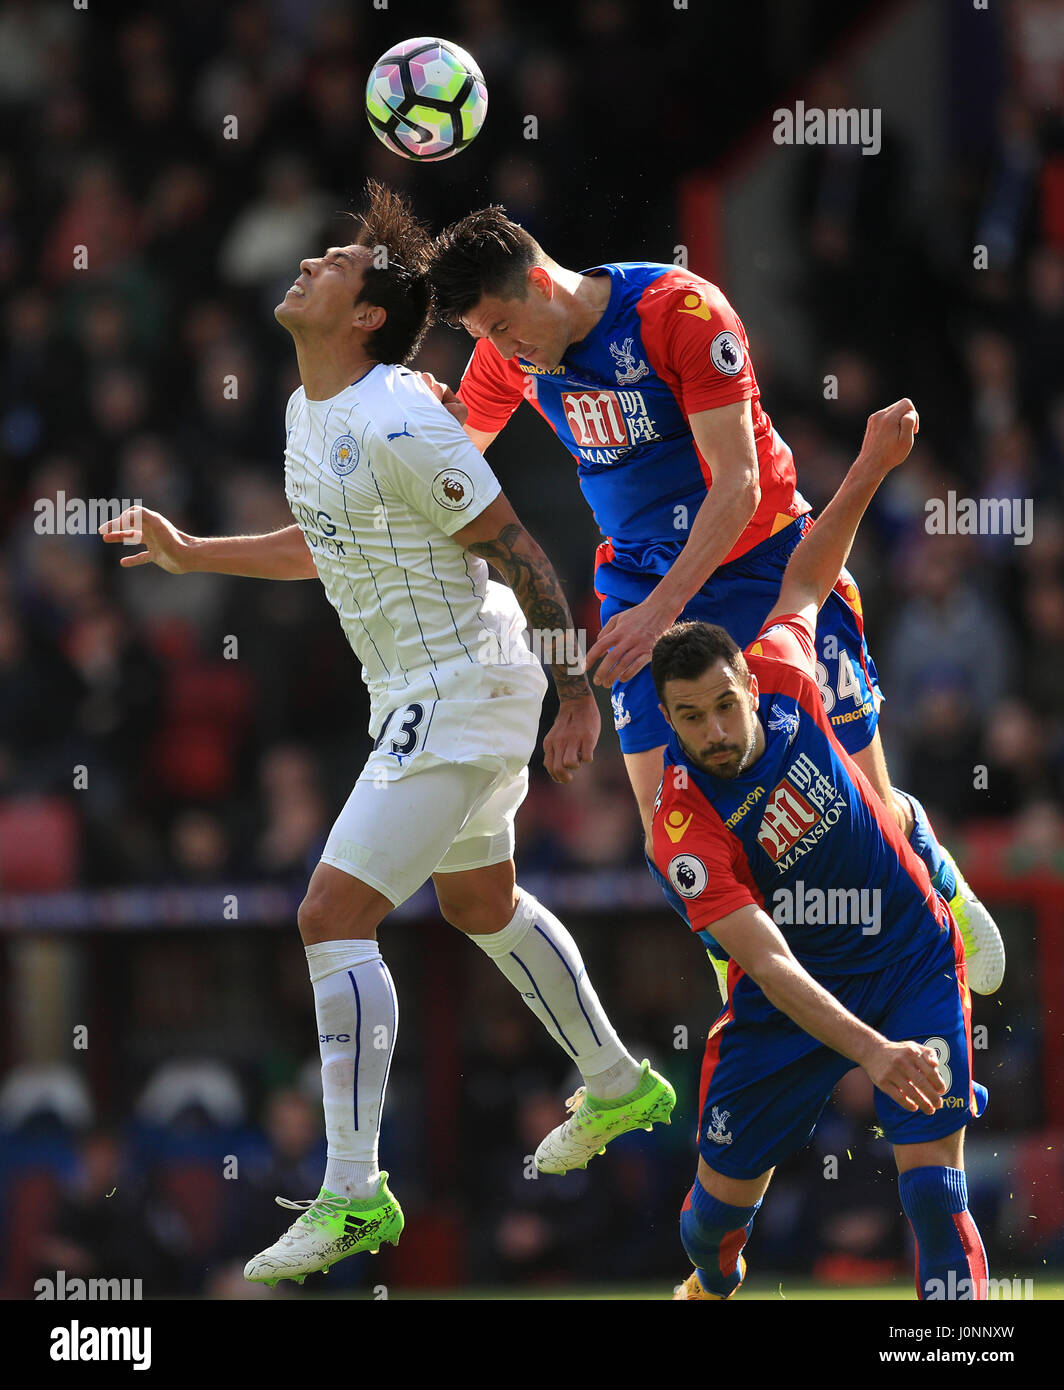 Leicester City's Daniel Amartey (left) and Crystal Palace's Martin Kelly (right) battle for the ball in the air during the Premier League match at Selhurst Park, London. PRESS ASSOCIATION Photo. Picture date: Saturday April 15, 2017. See PA story SOCCER Palace. Photo credit should read: Adam Davy/PA Wire. RESTRICTIONS: No use with unauthorised audio, video, data, fixture lists, club/league logos or "live" services. Online in-match use limited to 75 images, no video emulation. No use in betting, games or single club/league/player publications. Stock Photo